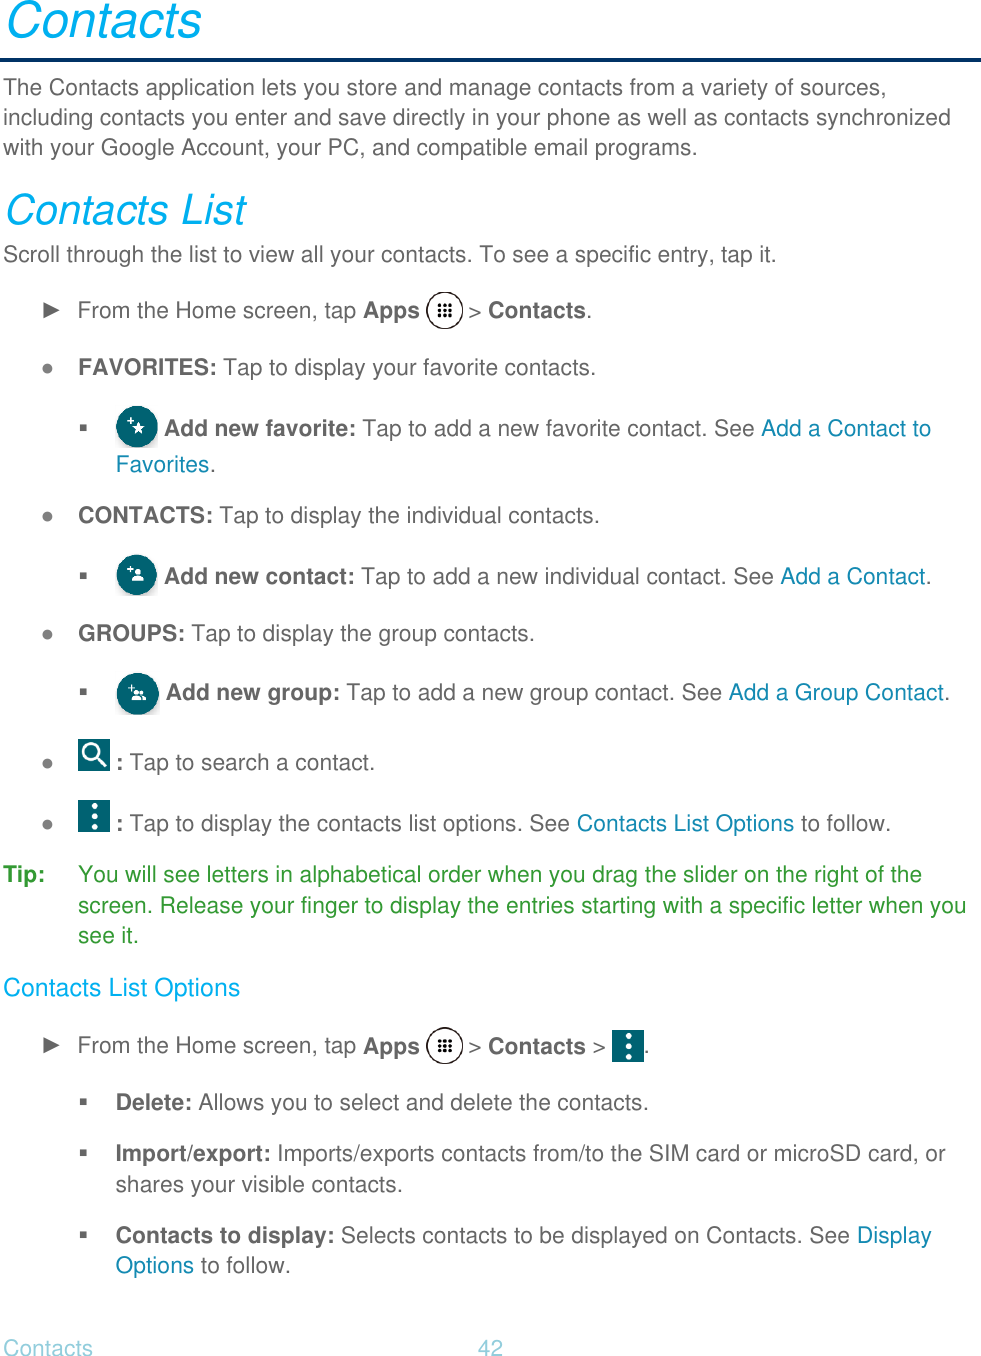 Contacts  42   Contacts The Contacts application lets you store and manage contacts from a variety of sources, including contacts you enter and save directly in your phone as well as contacts synchronized with your Google Account, your PC, and compatible email programs. Contacts List Scroll through the list to view all your contacts. To see a specific entry, tap it. ►  From the Home screen, tap Apps   &gt; Contacts. ● FAVORITES: Tap to display your favorite contacts.   Add new favorite: Tap to add a new favorite contact. See Add a Contact to Favorites. ● CONTACTS: Tap to display the individual contacts.   Add new contact: Tap to add a new individual contact. See Add a Contact. ● GROUPS: Tap to display the group contacts.   Add new group: Tap to add a new group contact. See Add a Group Contact. ●  : Tap to search a contact. ●  : Tap to display the contacts list options. See Contacts List Options to follow. Tip:  You will see letters in alphabetical order when you drag the slider on the right of the screen. Release your finger to display the entries starting with a specific letter when you see it. Contacts List Options ►  From the Home screen, tap Apps   &gt; Contacts &gt;  .  Delete: Allows you to select and delete the contacts.  Import/export: Imports/exports contacts from/to the SIM card or microSD card, or shares your visible contacts.  Contacts to display: Selects contacts to be displayed on Contacts. See Display Options to follow. 